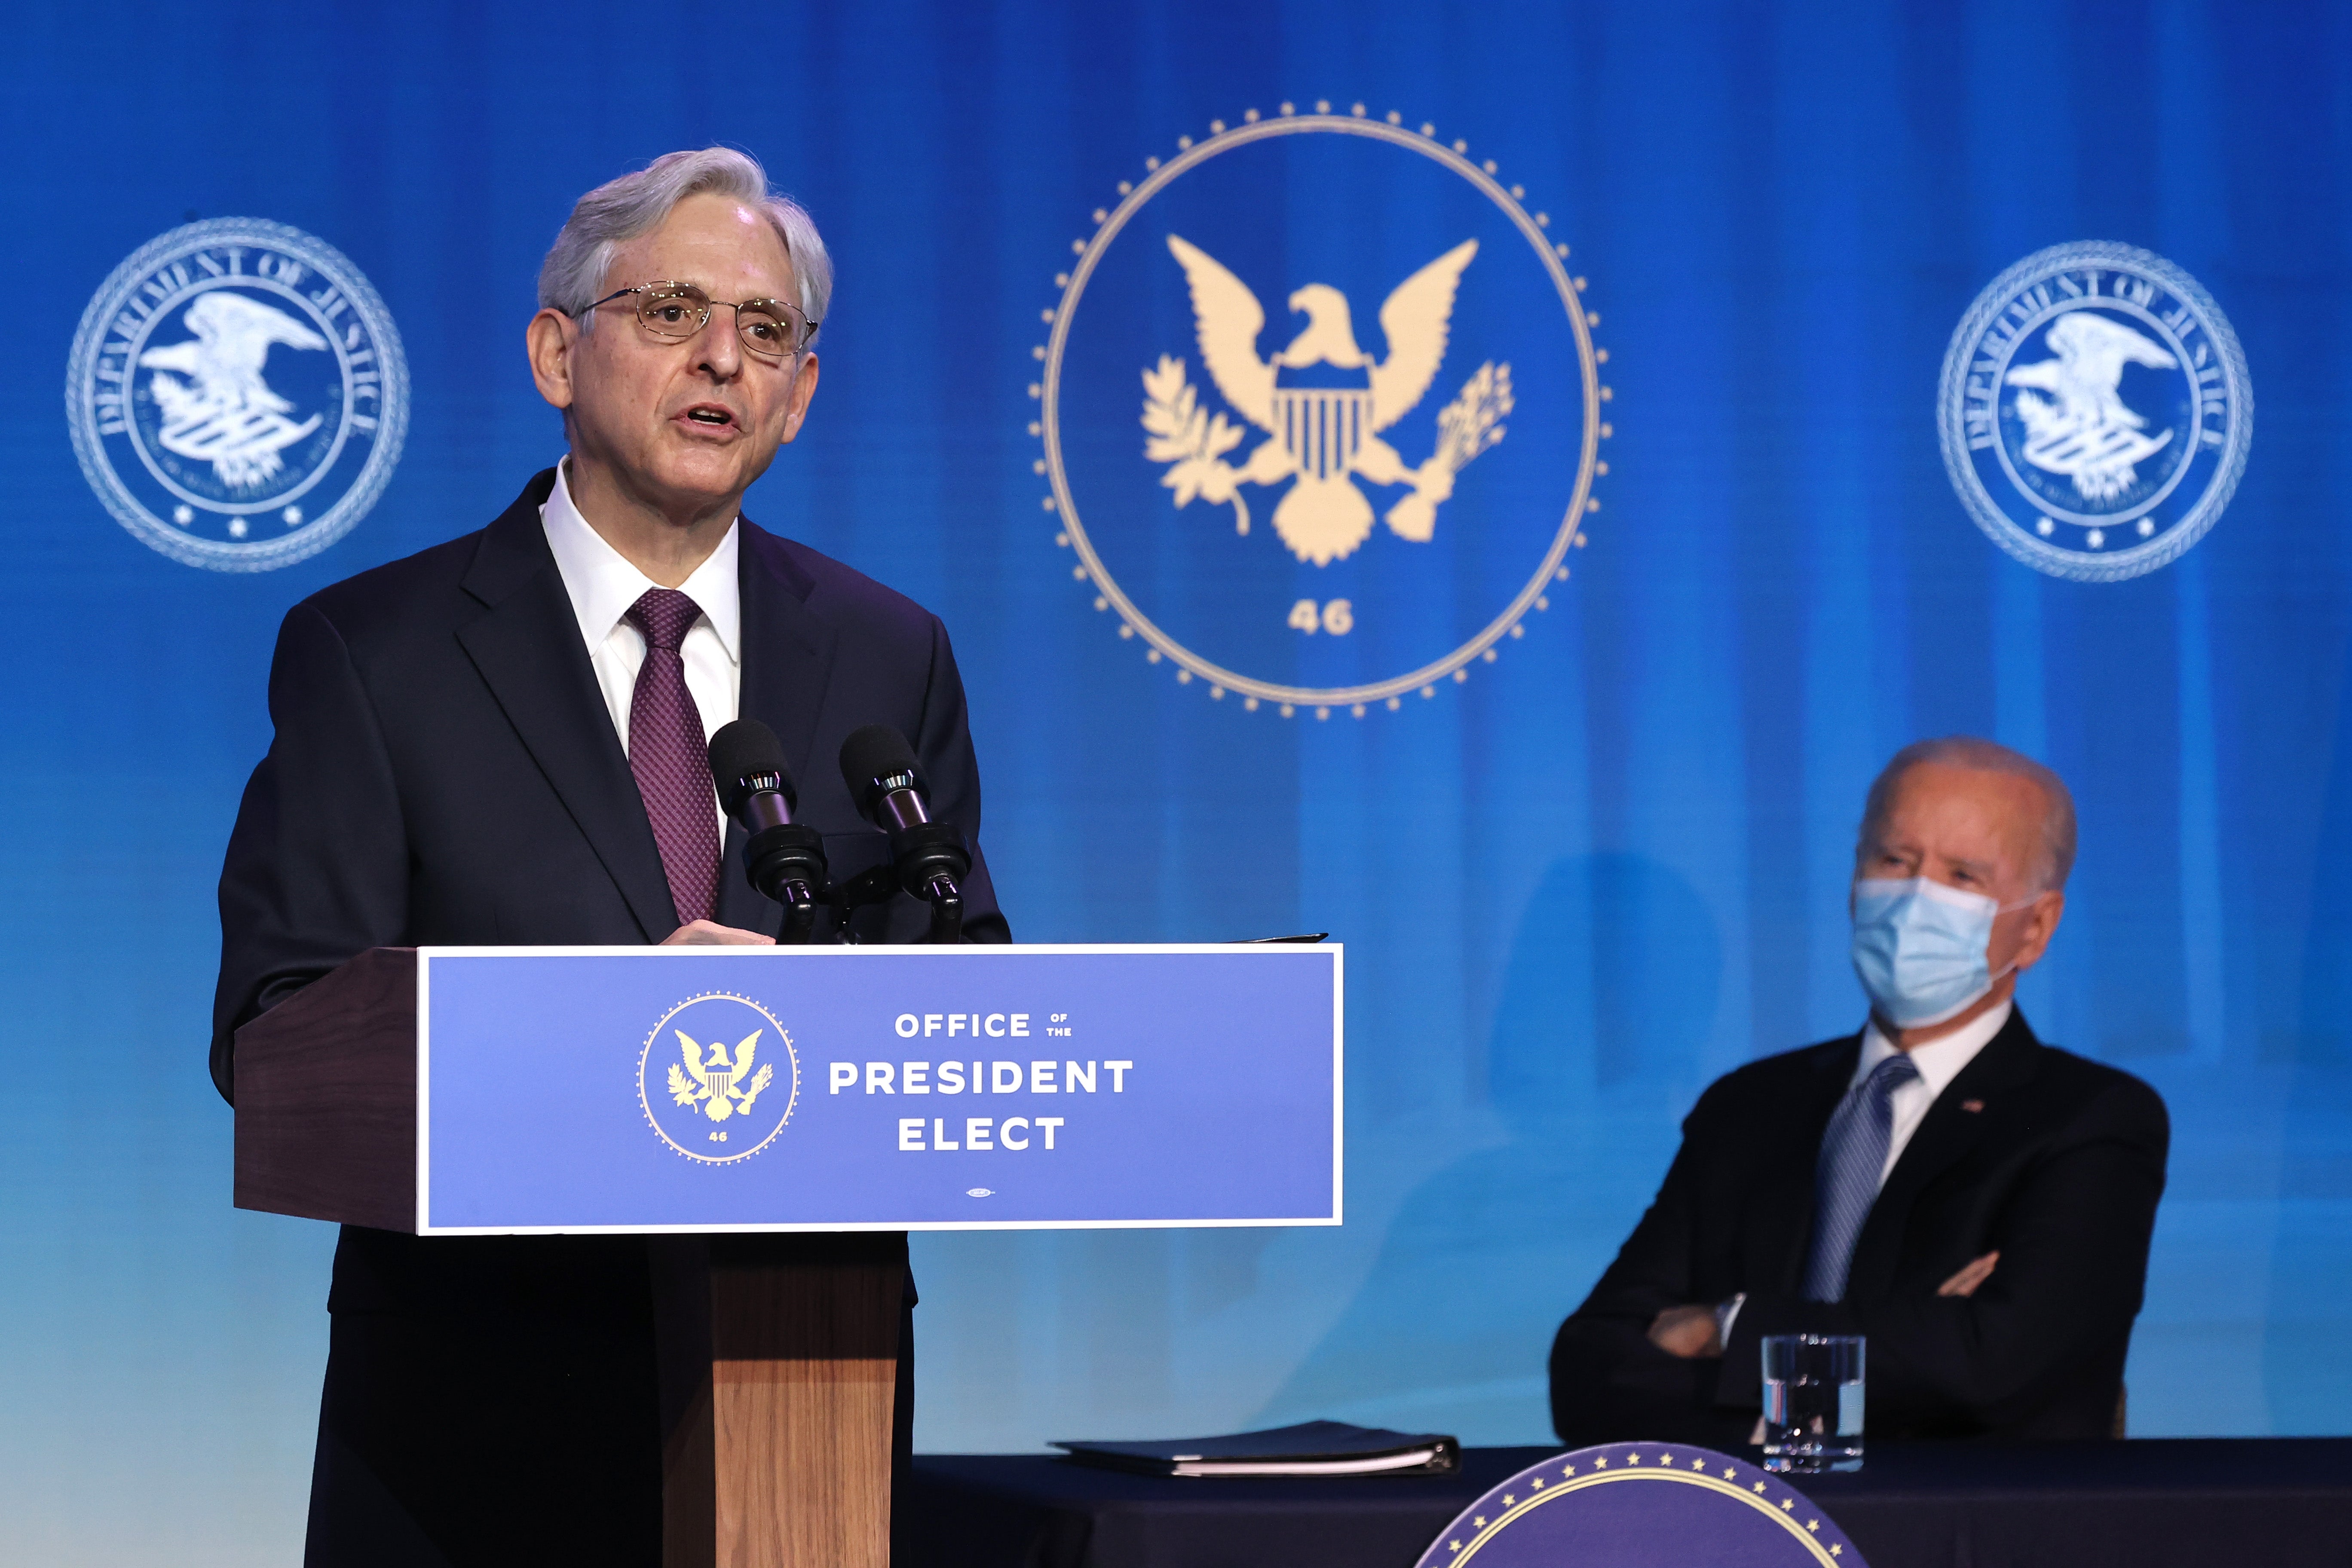 <p>Merrick Garland vows to go after white supremacists as attorney general ahead of confirmation hearing</p>